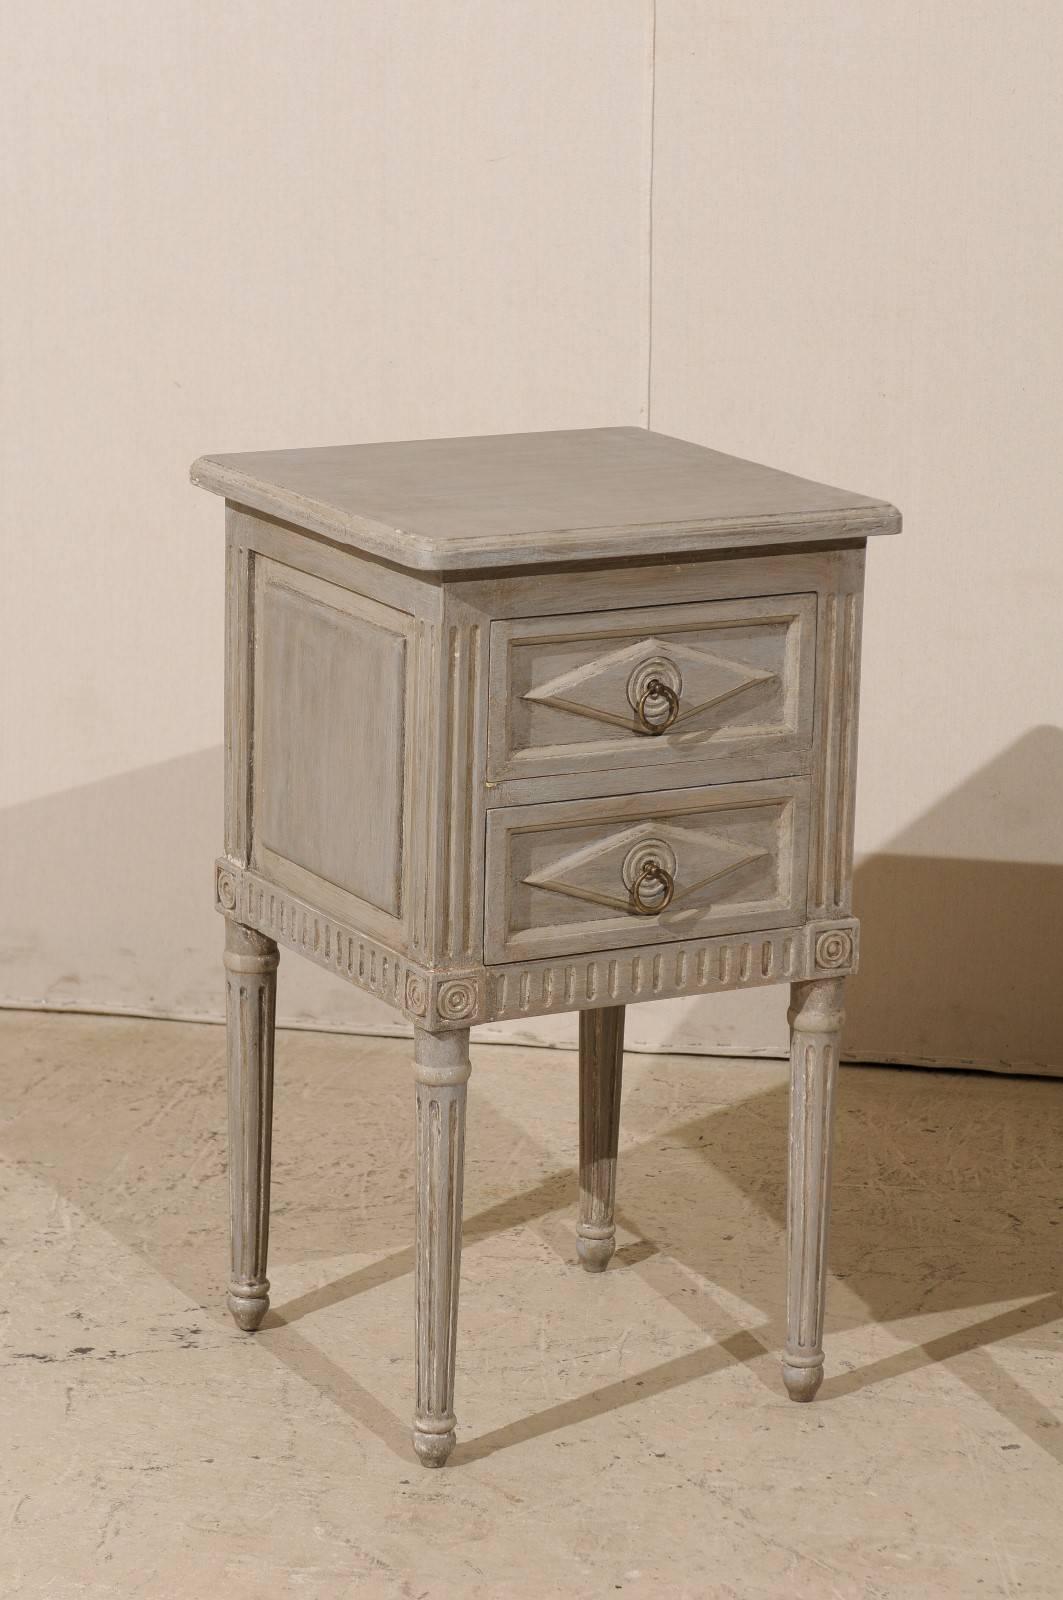 Pair of Small Sized Two-Drawer Painted Wood Nightstand Tables in Neutral Grey 3